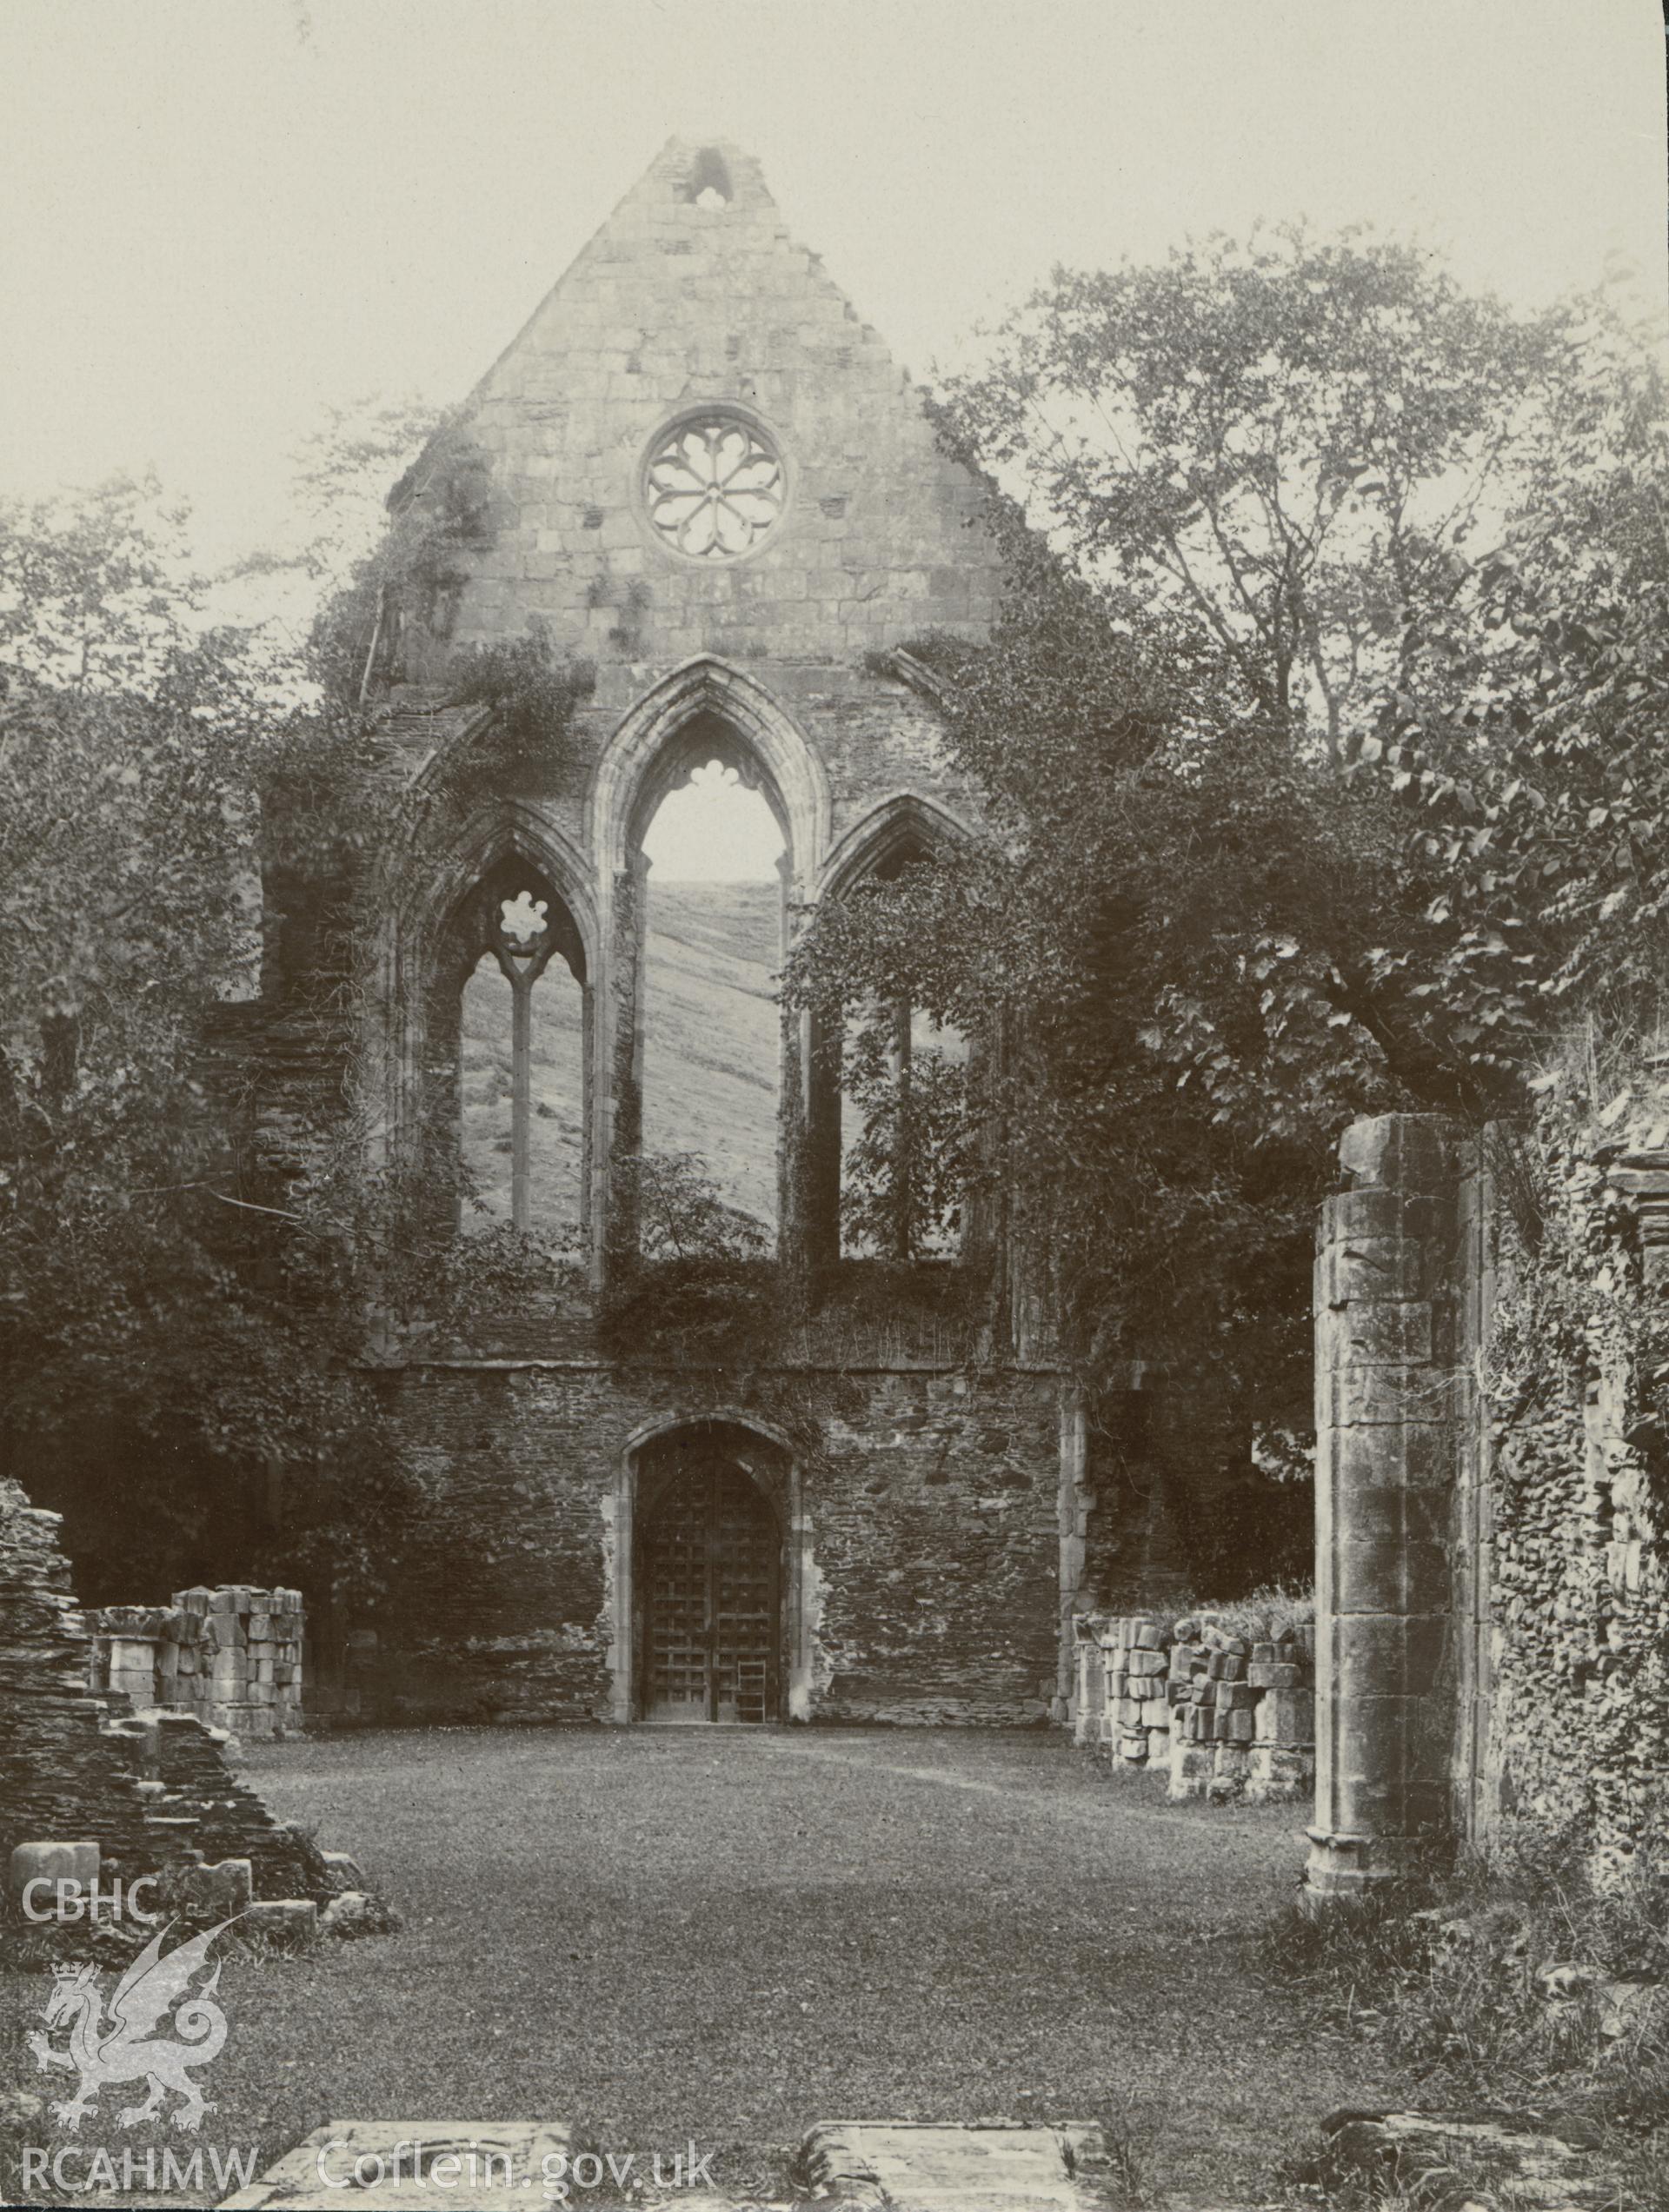 Albumen print by T.W. Reader showing interior view of Valle Crucis Abbey.